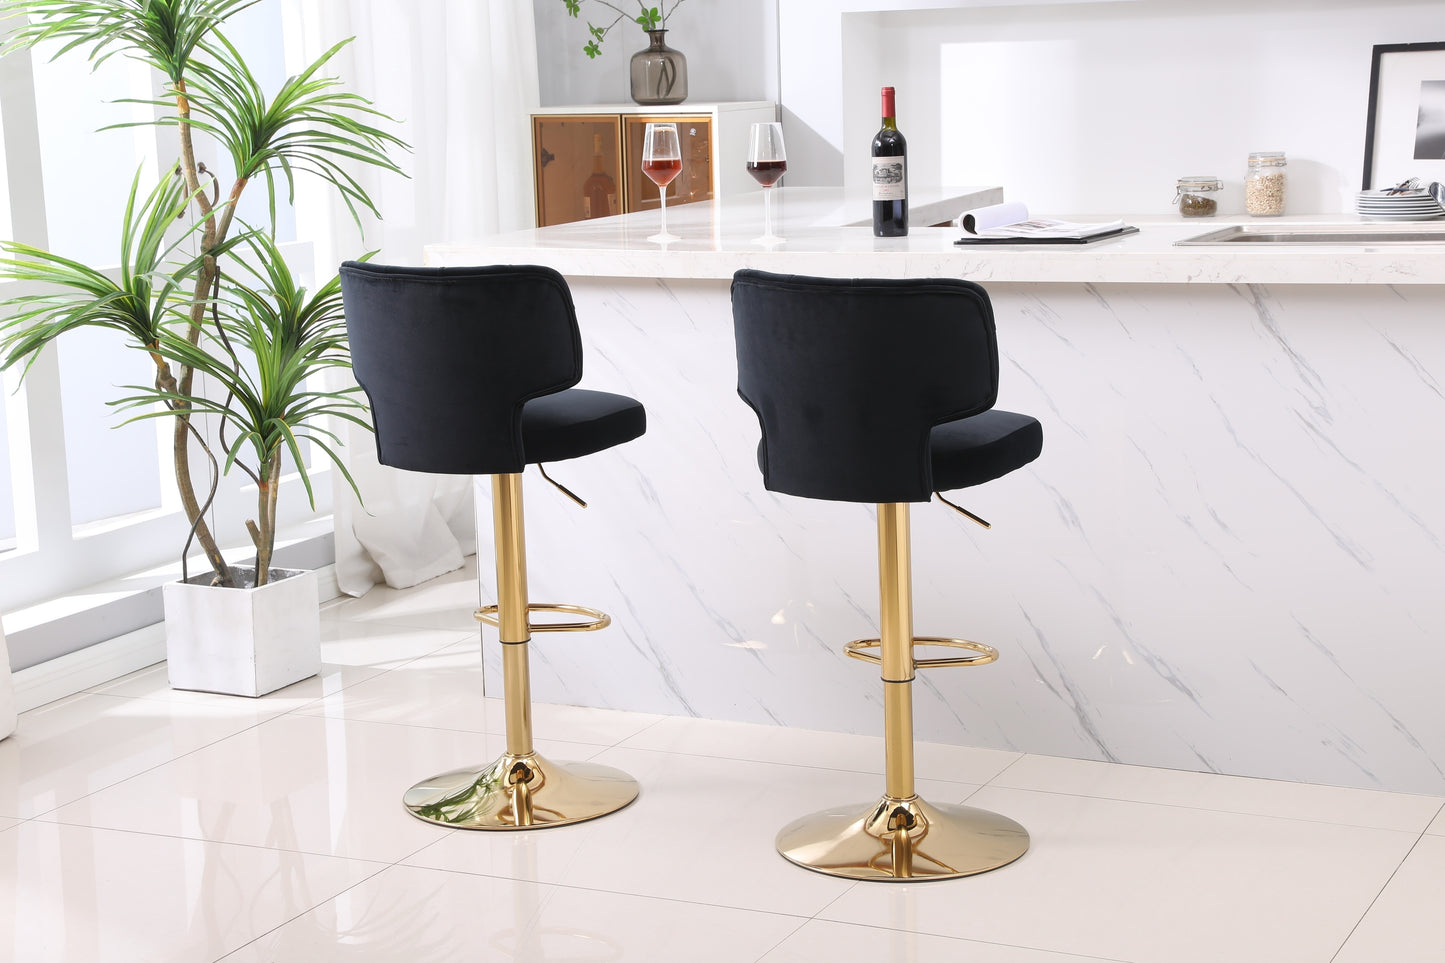 Modern Barstools Bar Height, Swivel Velvet Bar Stool Counter Height Bar Chairs Adjustable Tufted Stool with Back& Footrest for Home Bar Kitchen Island Chair (Black, Set of 2) - Enova Luxe Home Store